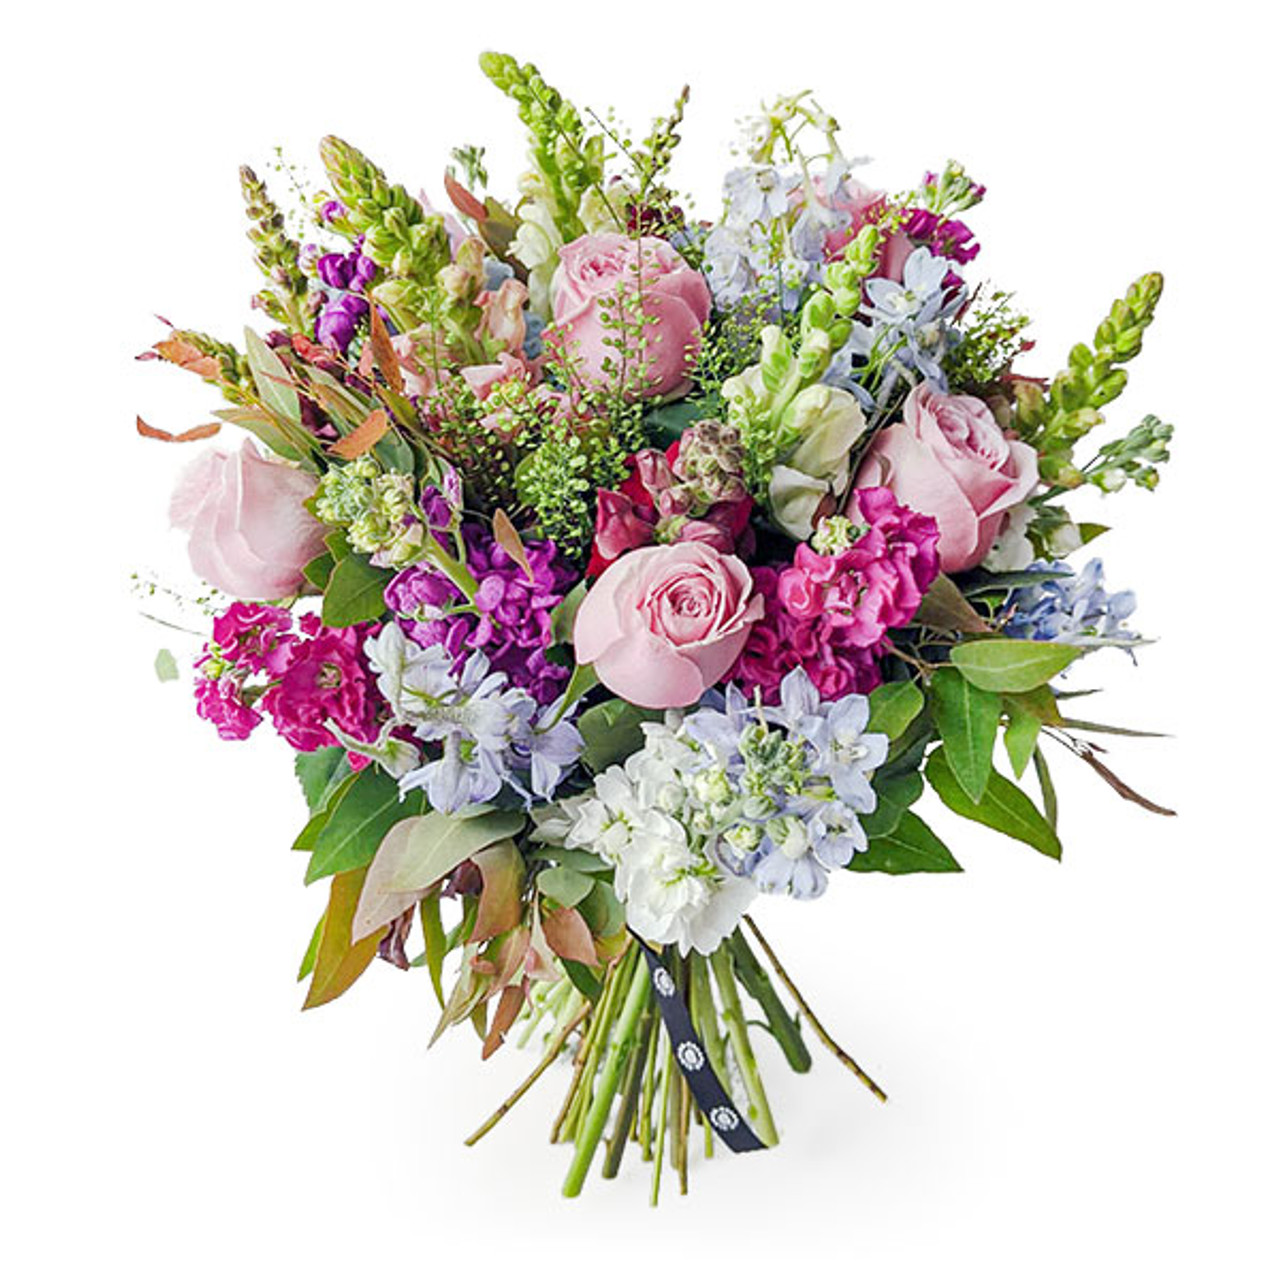 scented stocks, roses, snapdragons, delphiniums